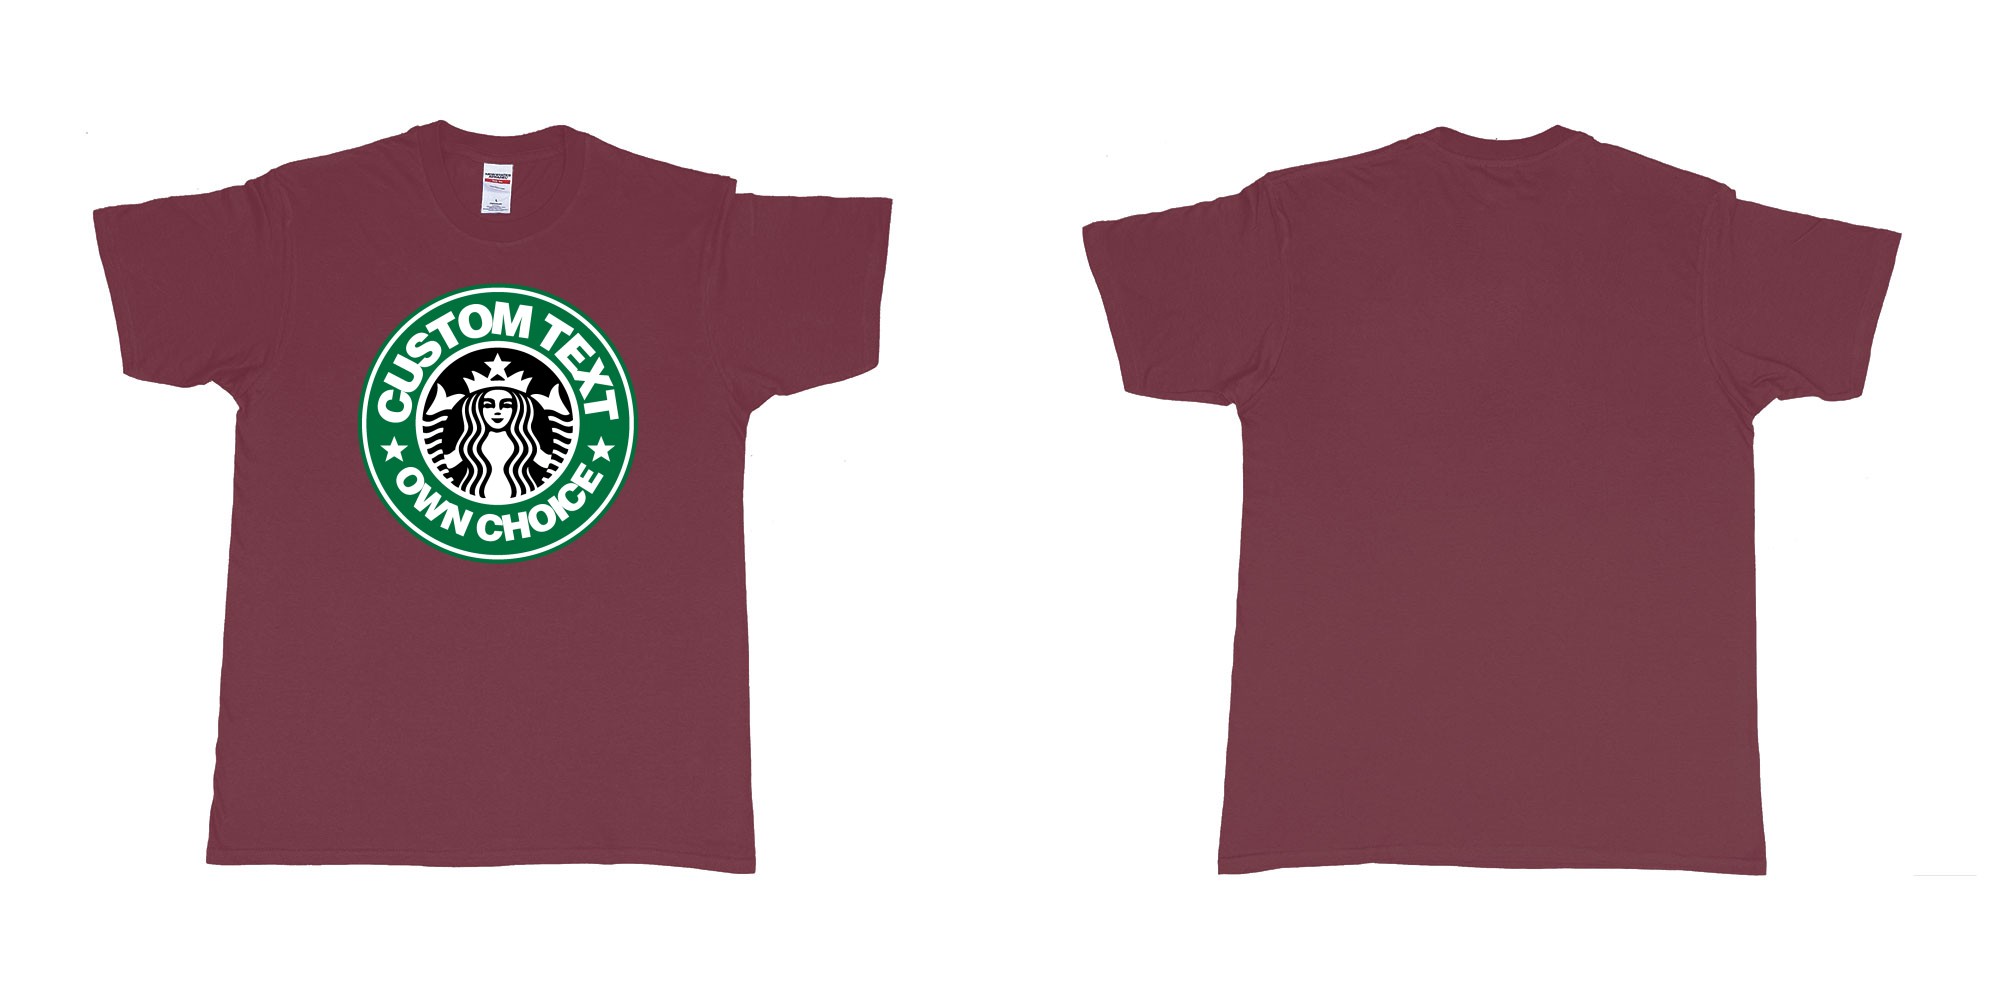 Custom tshirt design starbuks coffee custom own text in fabric color marron choice your own text made in Bali by The Pirate Way